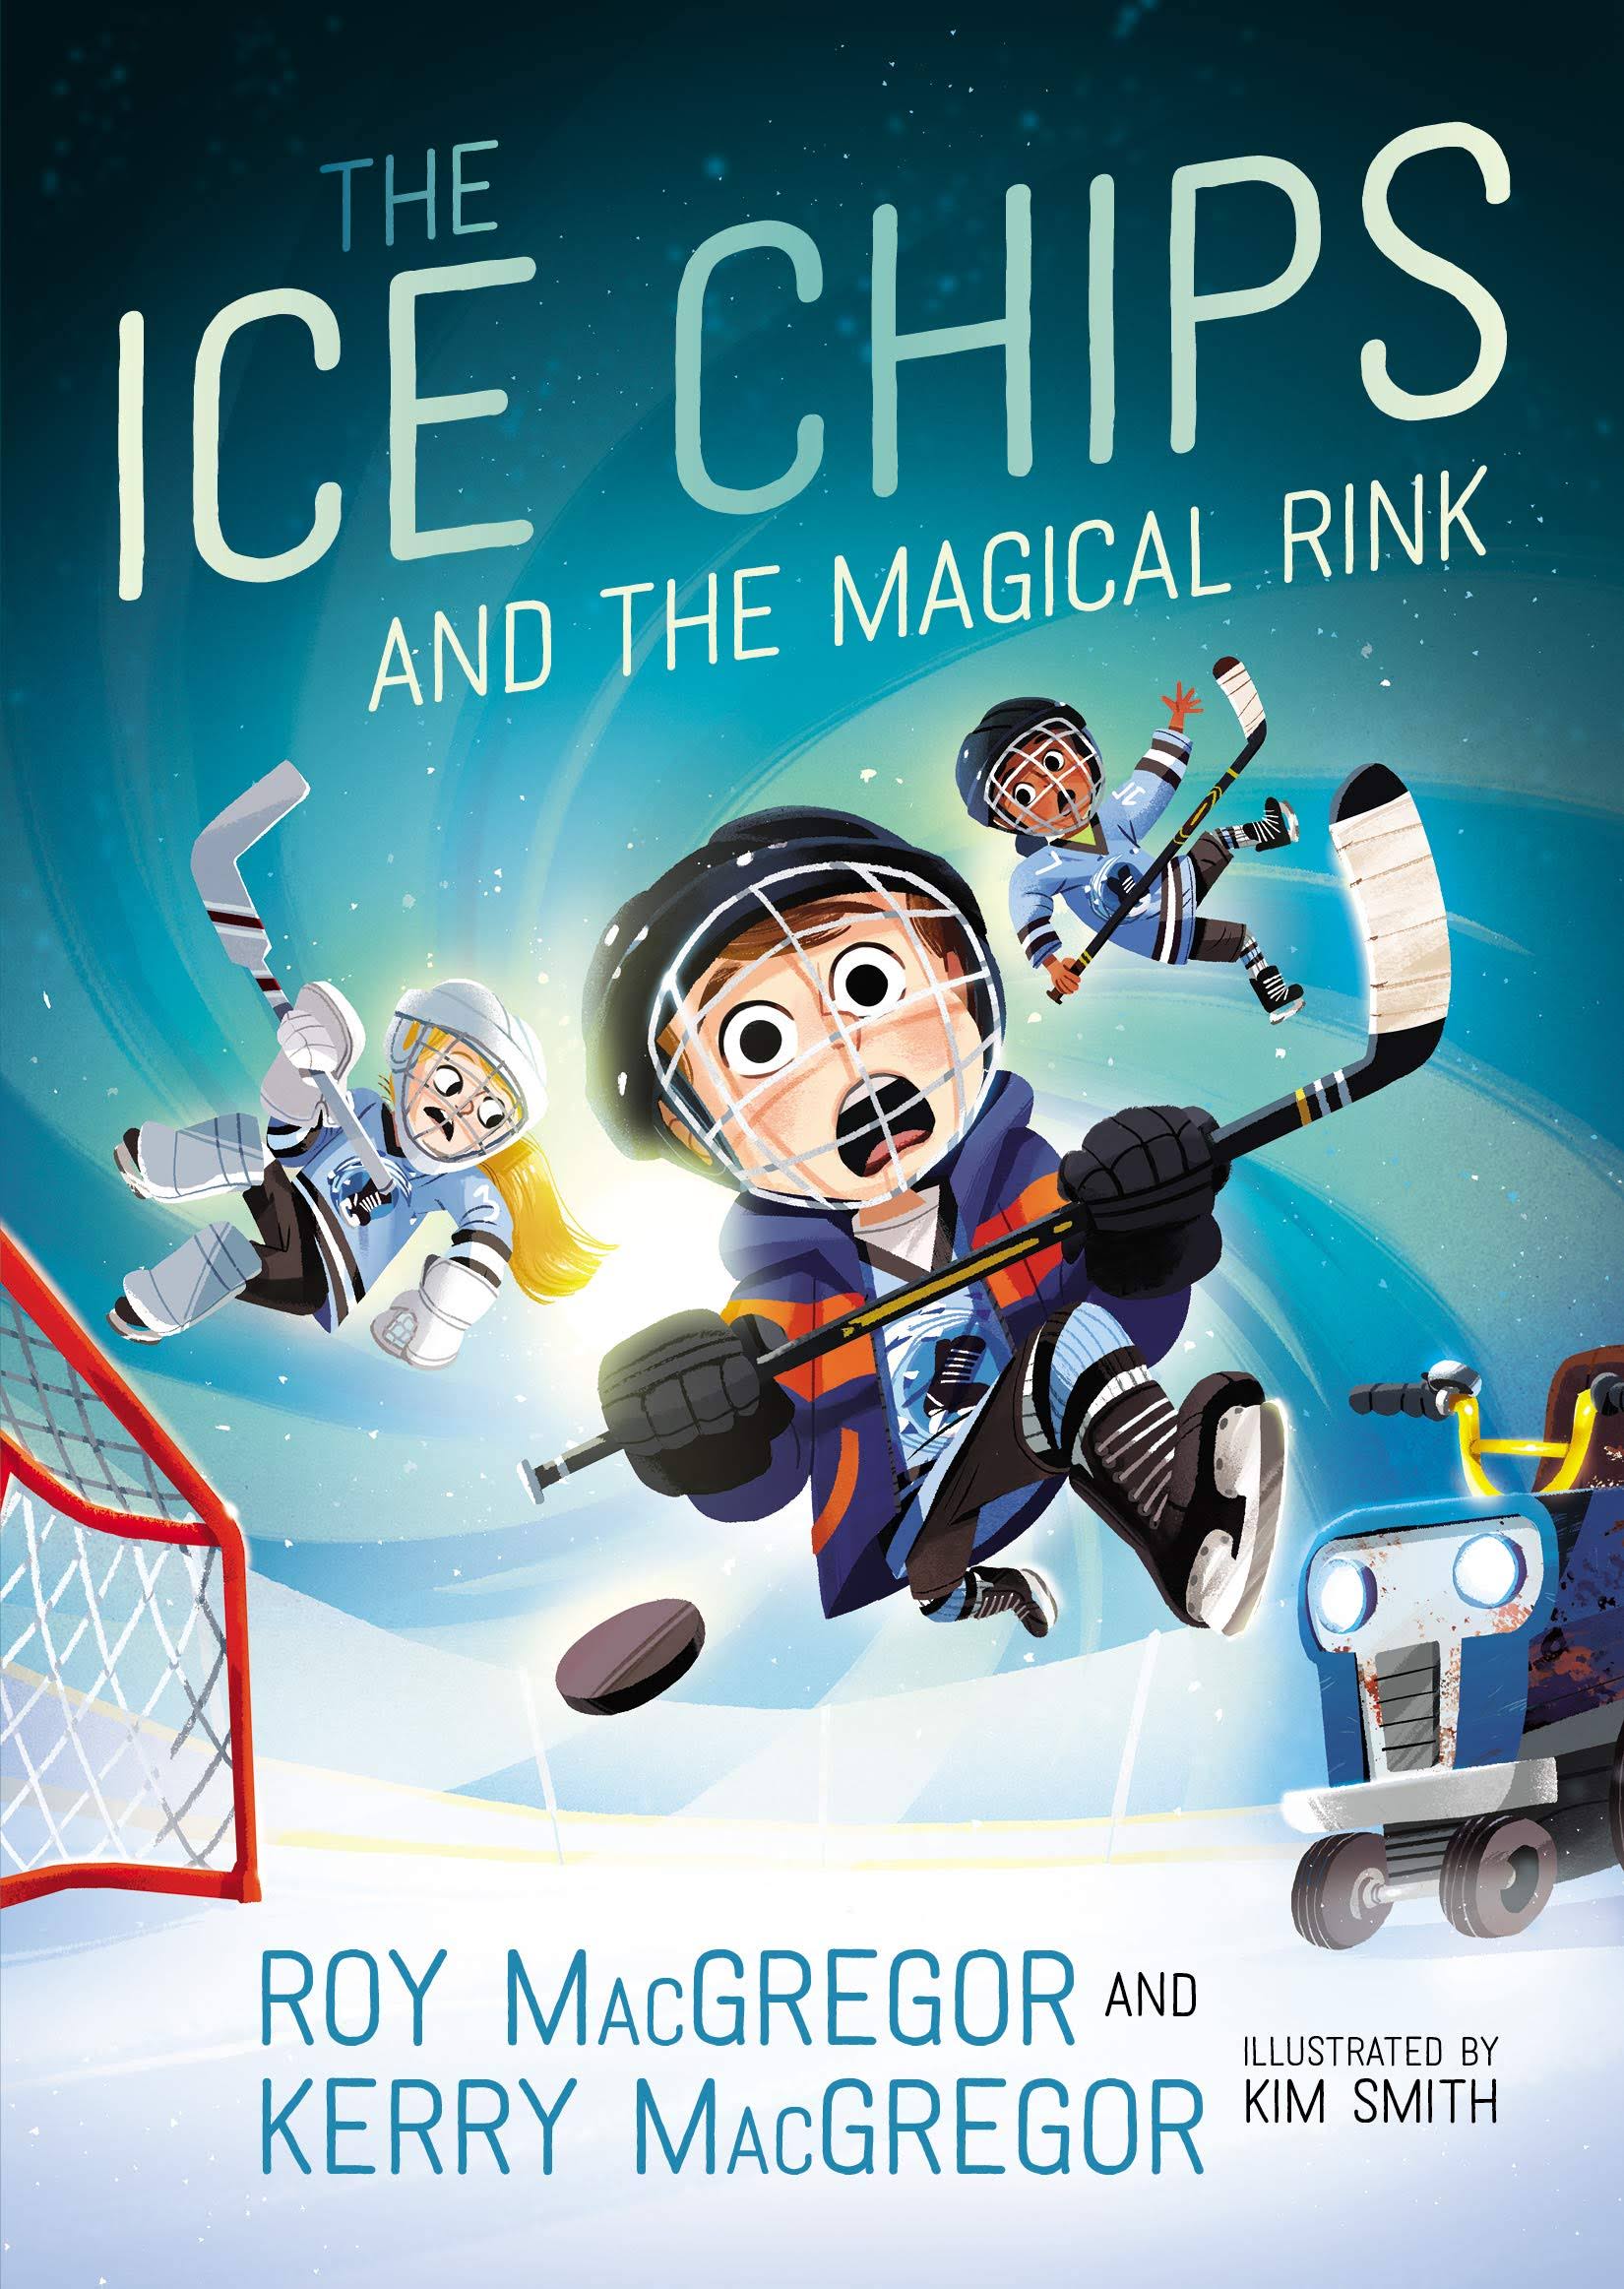 The Ice Chips and the Magical Rink: Ice Chips Series Book 1 - Roy MacGregor and Kerry MacGregor